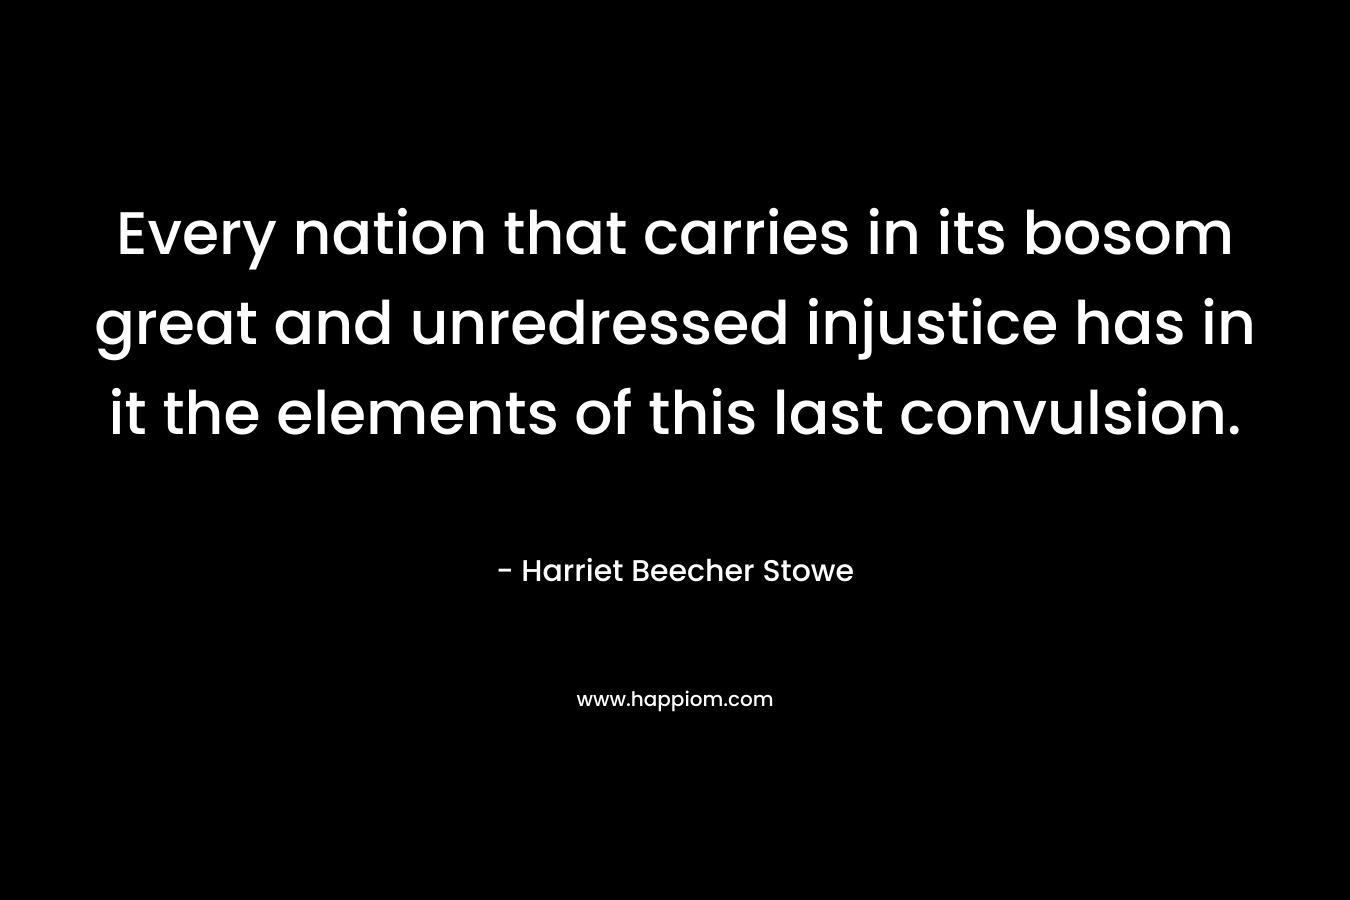 Every nation that carries in its bosom great and unredressed injustice has in it the elements of this last convulsion.